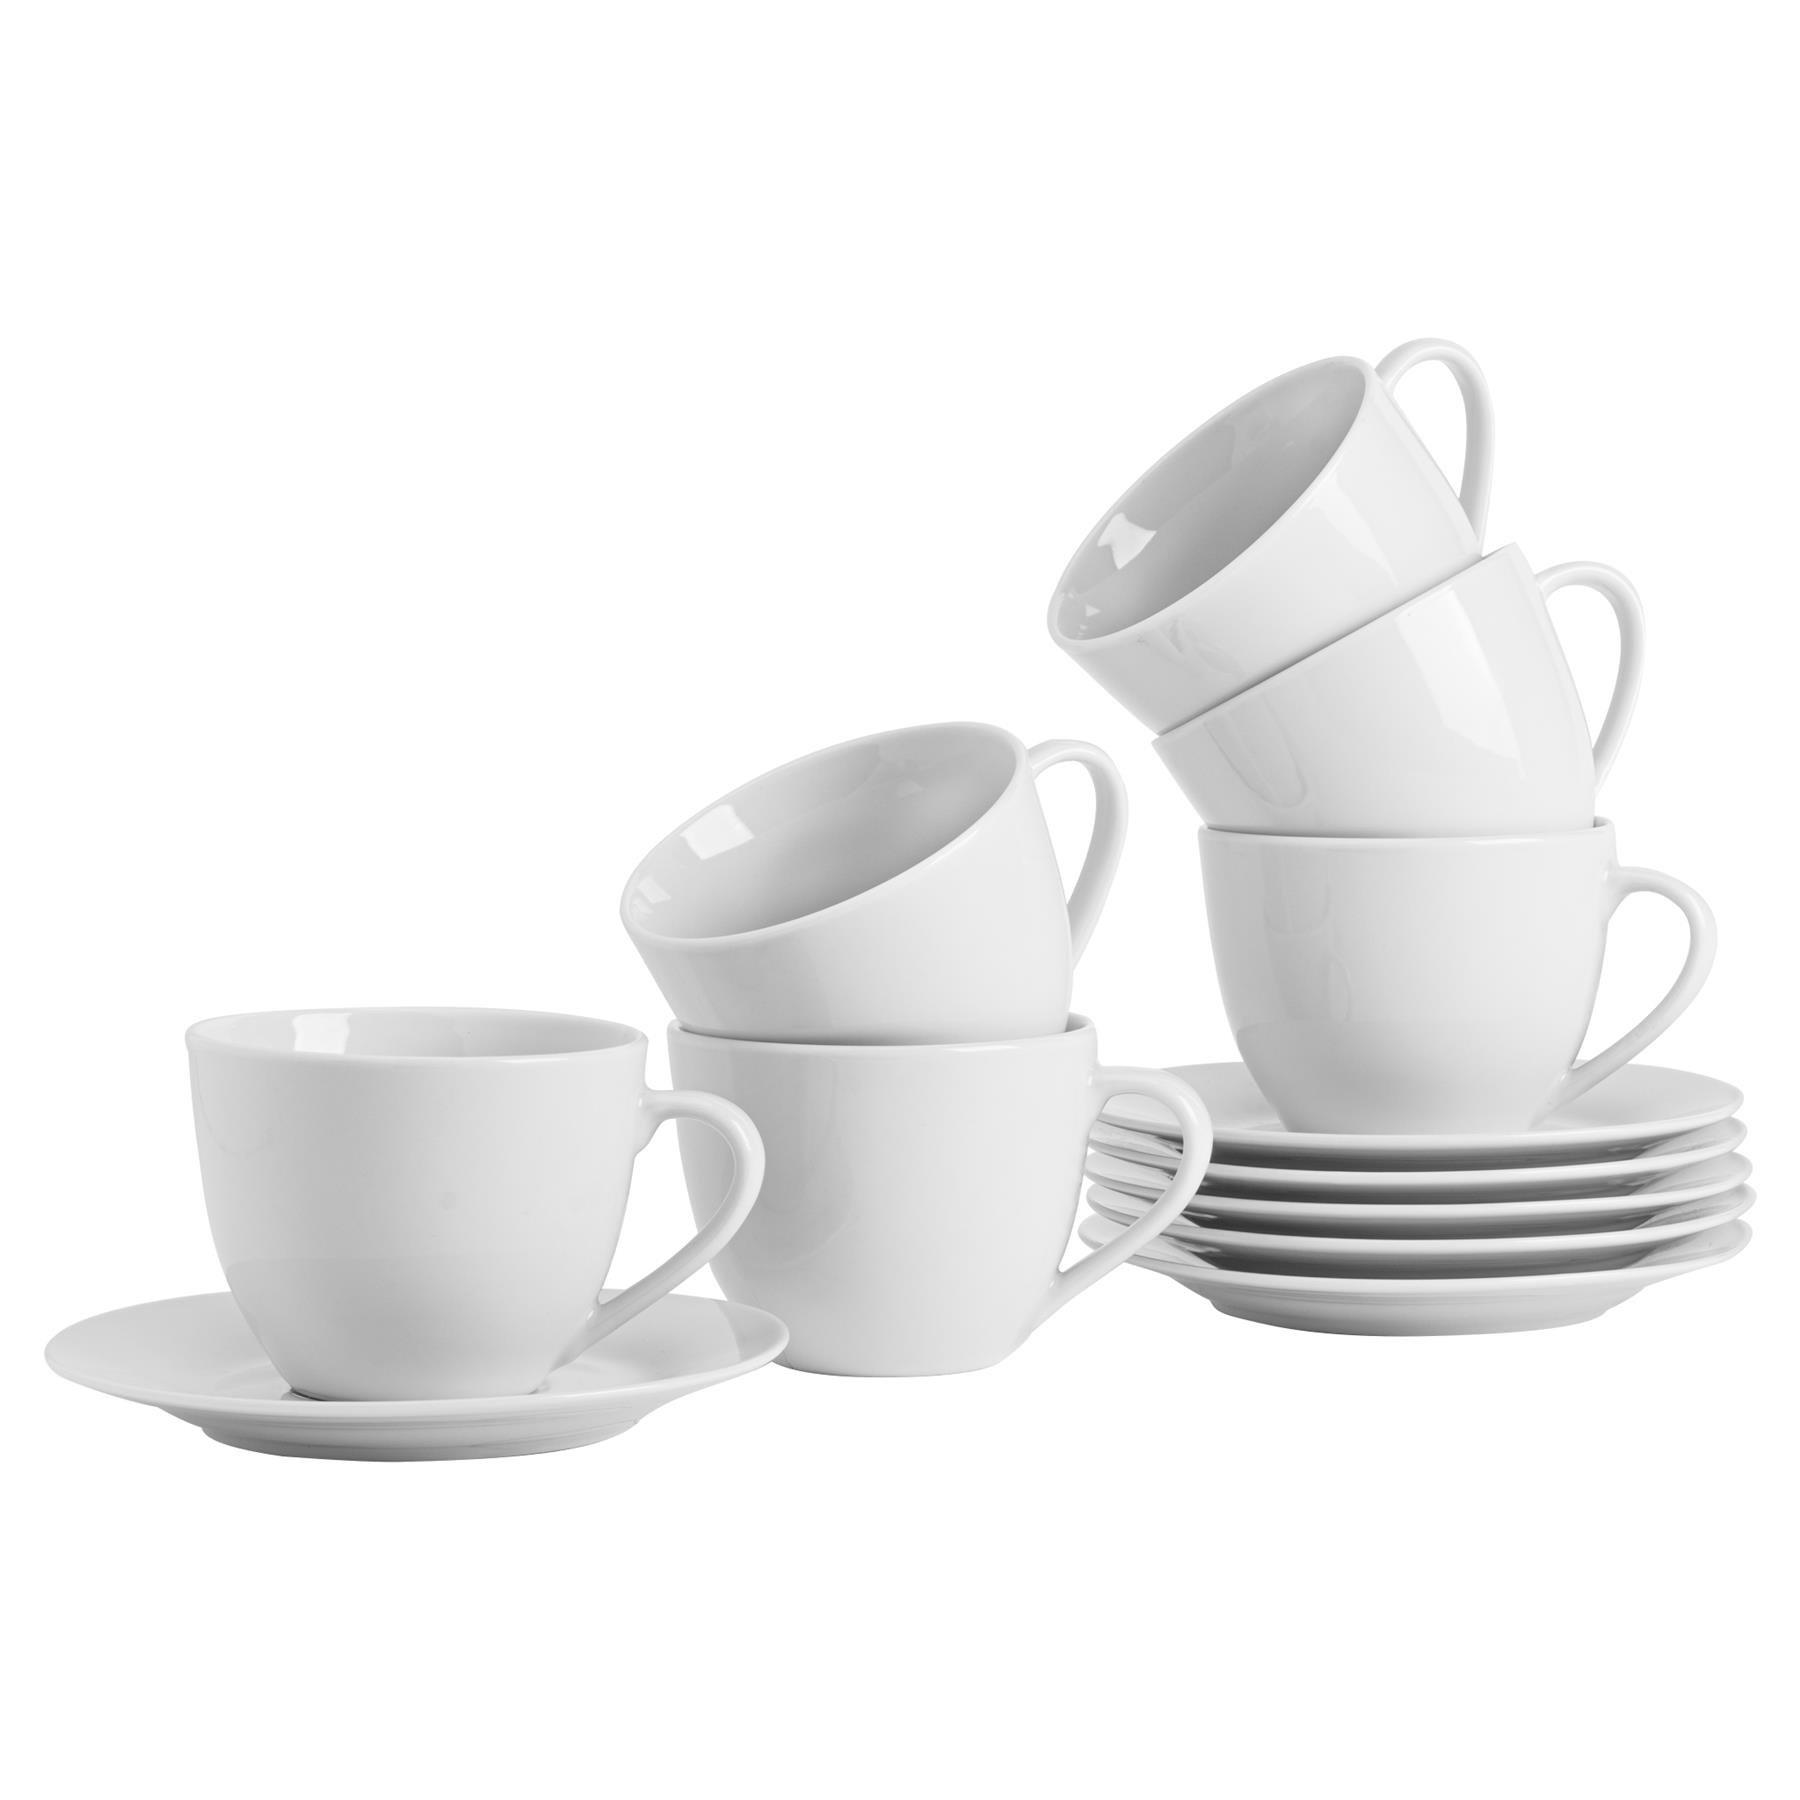 Classic White Cappuccino Cup & Saucer Set - 320ml - 48 Piece